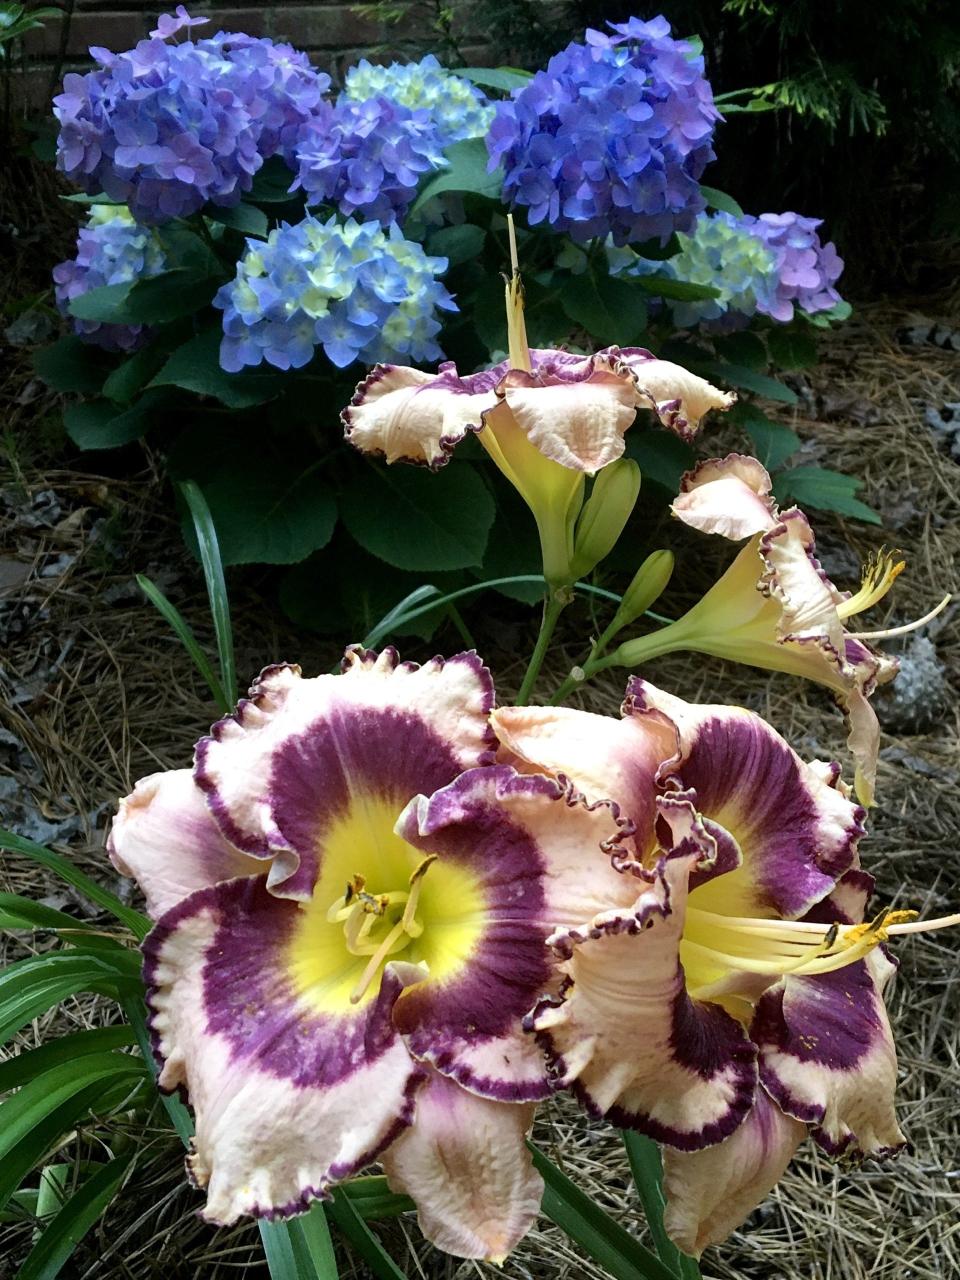 Let’s Dance Arriba is another great reblooming hydrangea. Here it is partnered with Rainbow Rhythm Sound of My Heart daylilies.